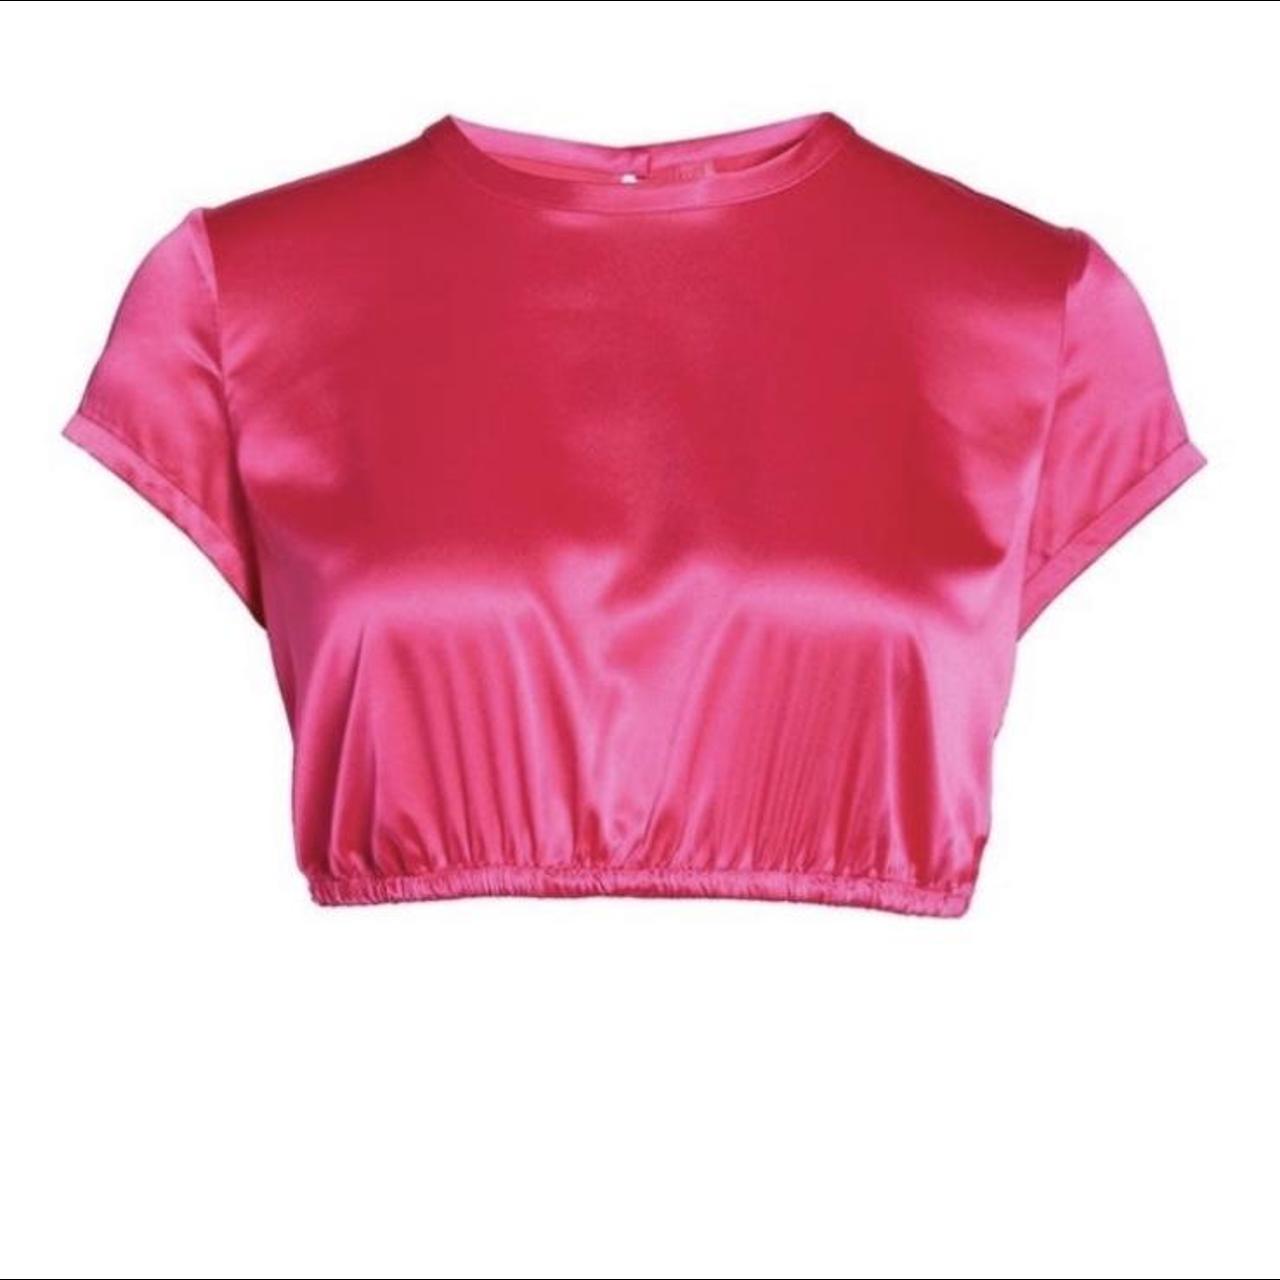 NWT SKIMS Shine Satin Woven Crop Top in Pink Sand - Size 3X